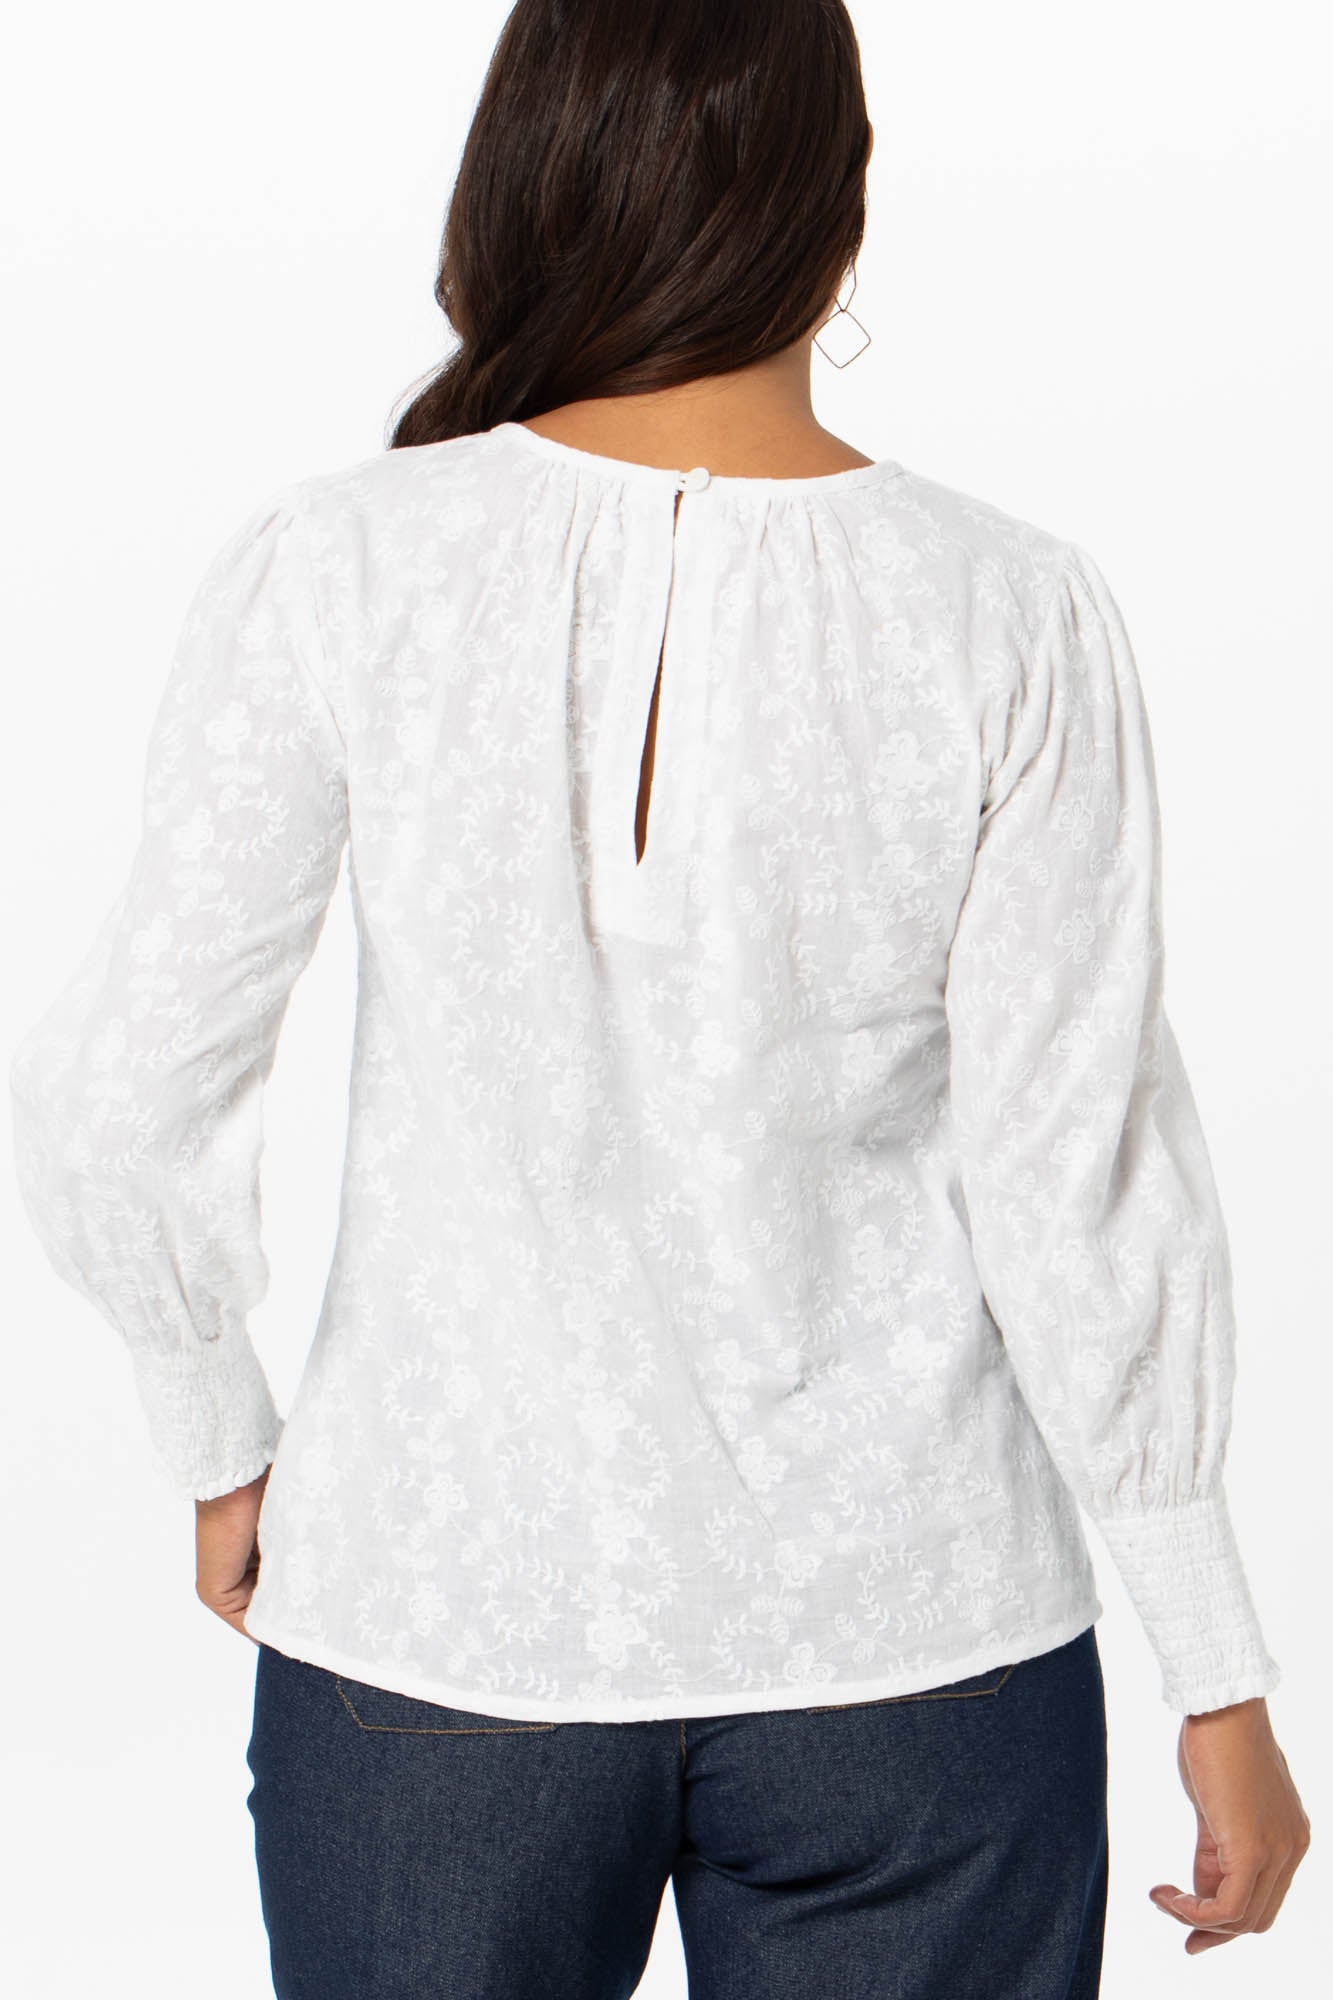 Farah Top White Embroidery